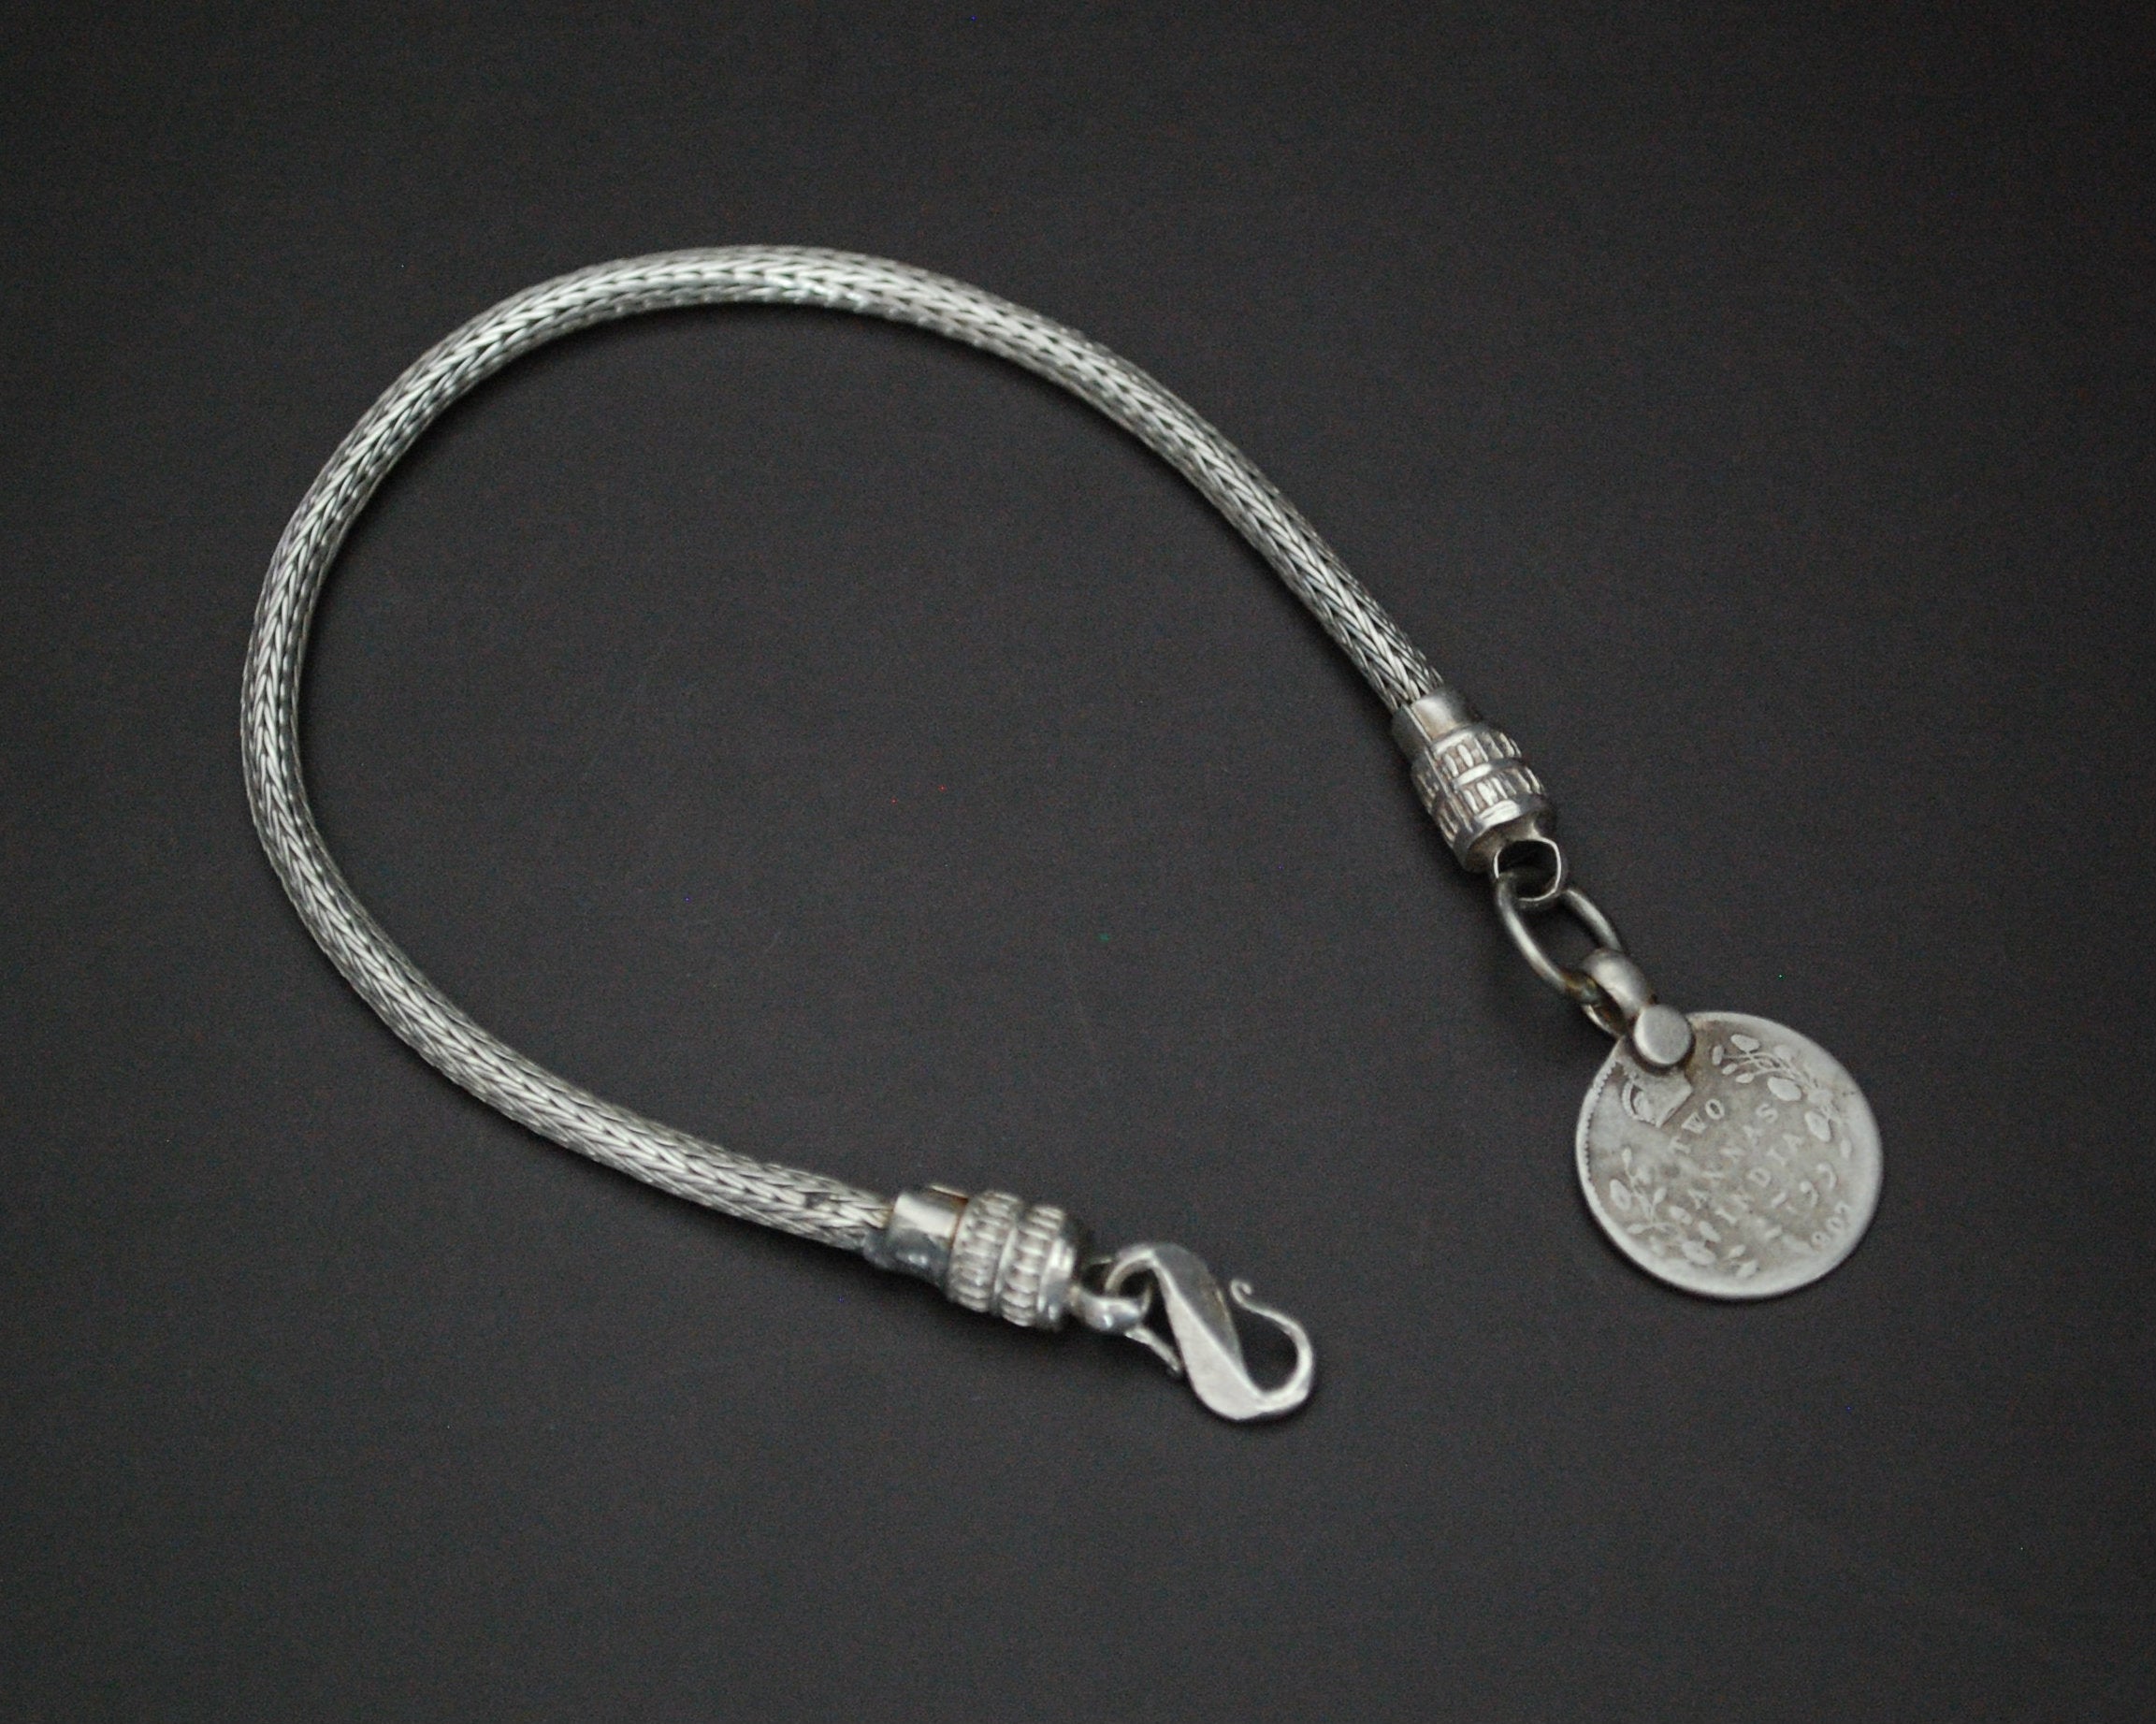 XS Rajasthani Snake Chain Bracelet with Coin